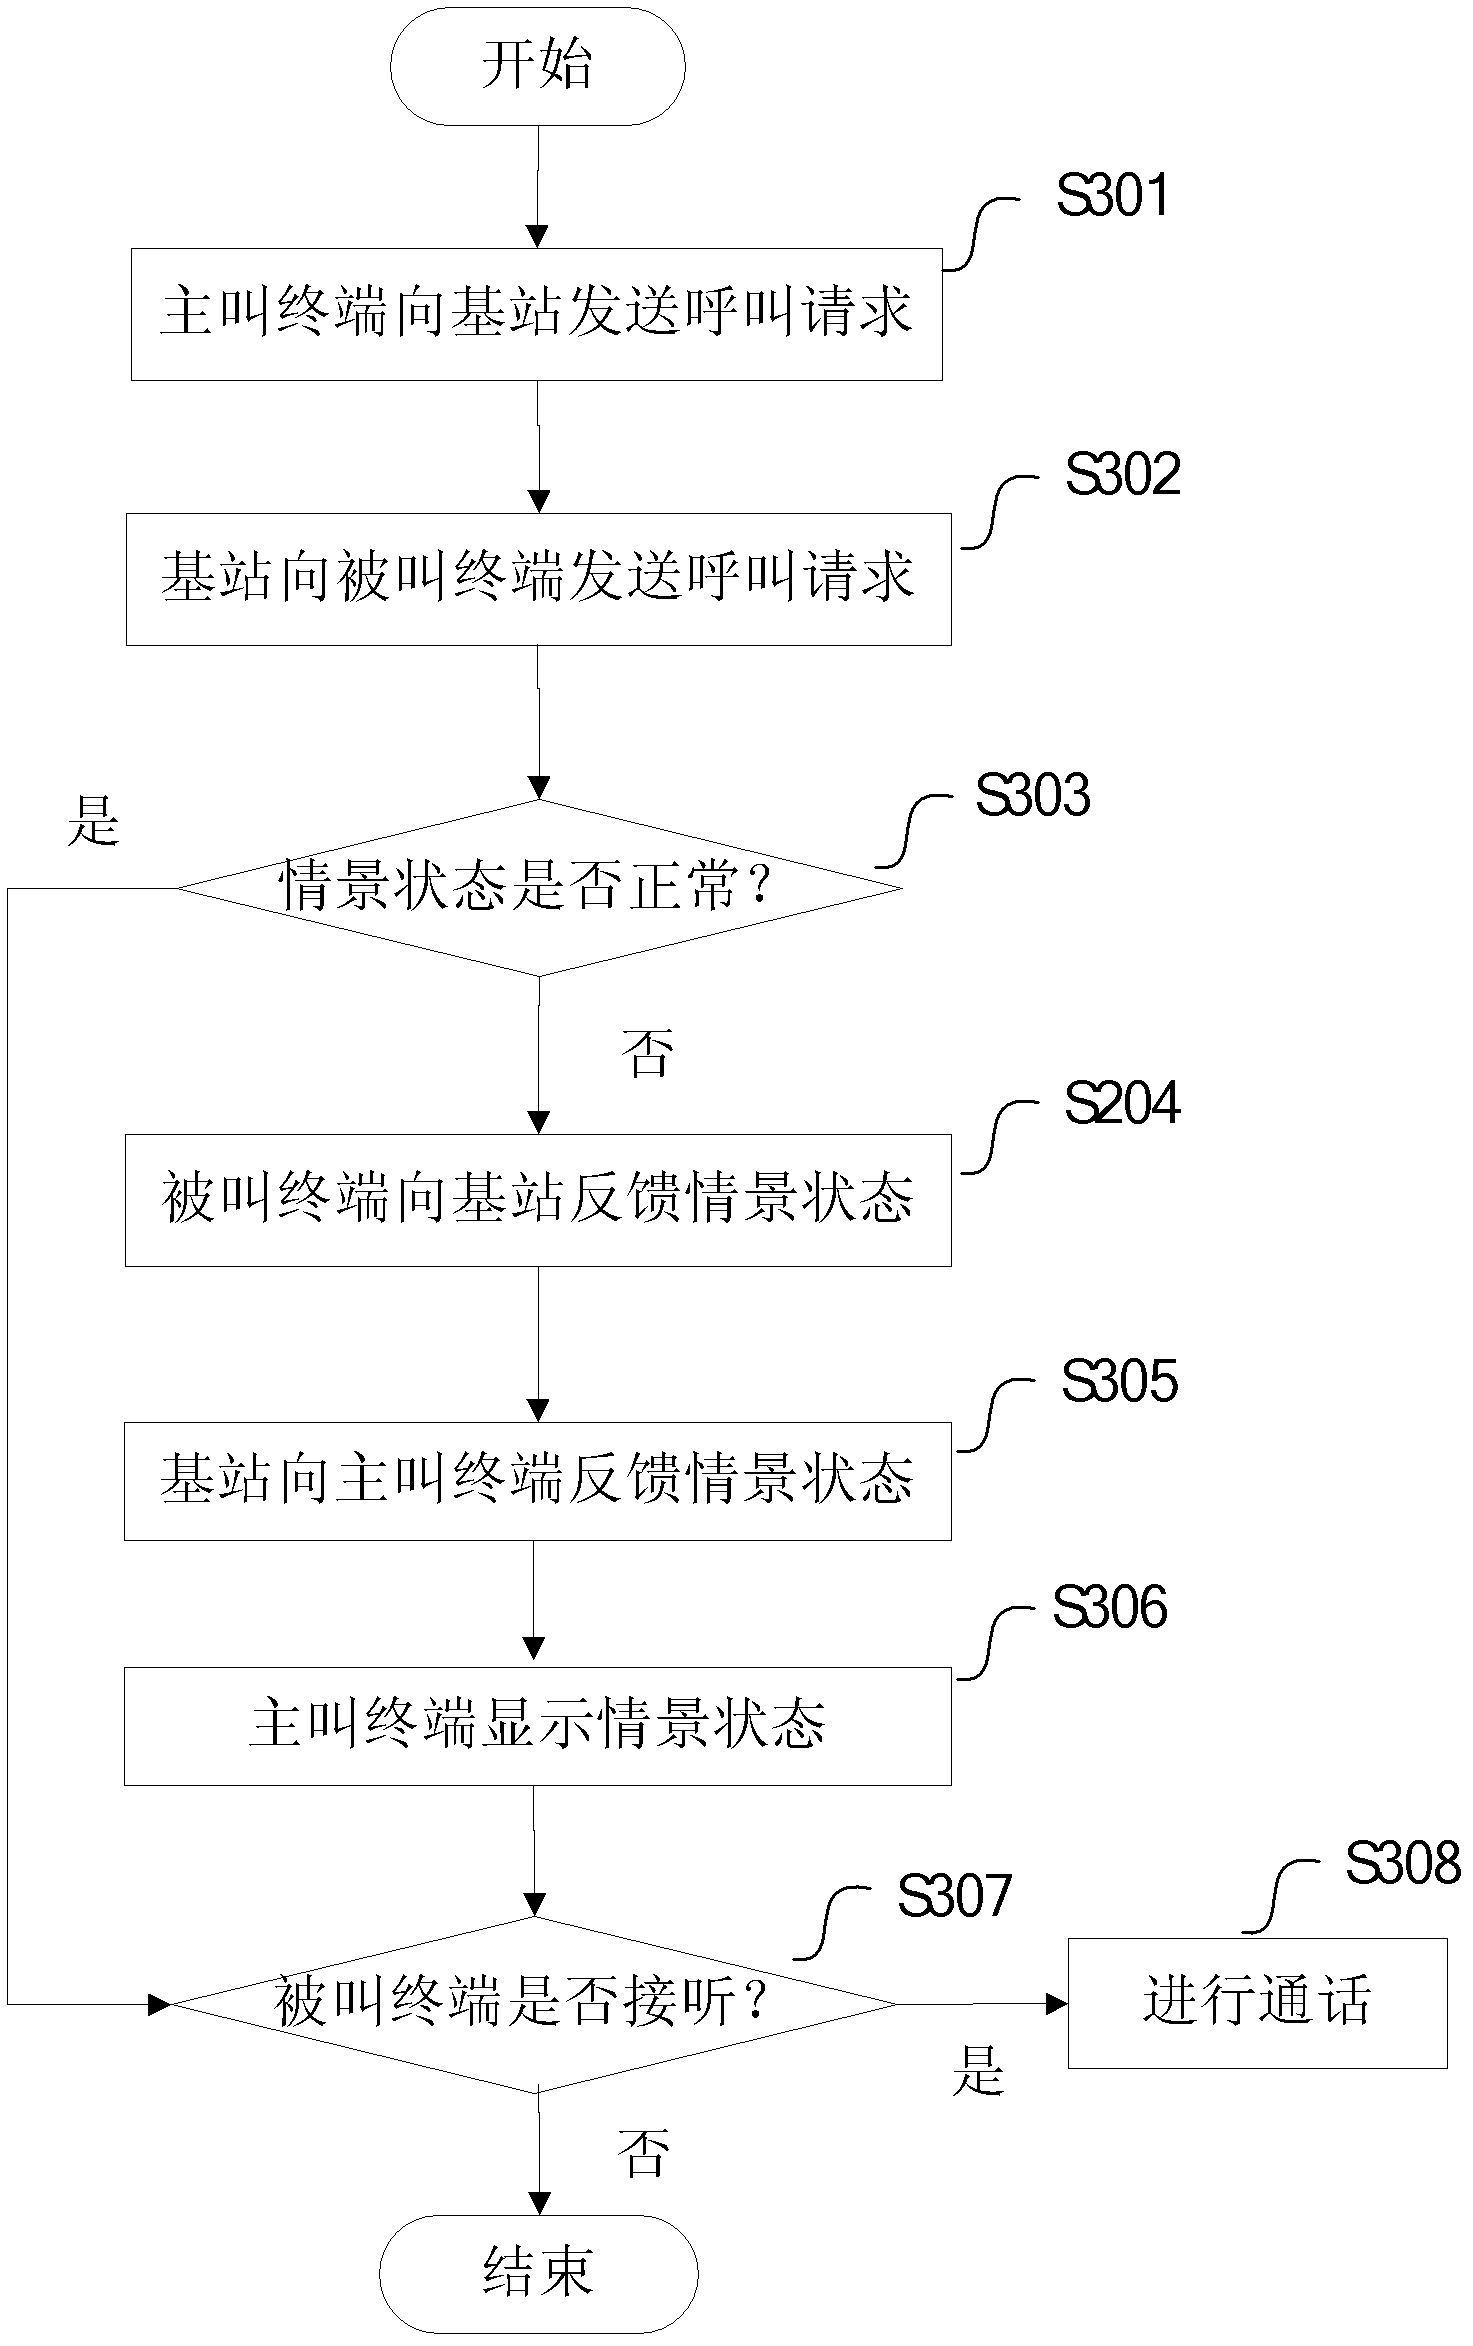 Profile state feedback method, profile state display method and mobile terminals